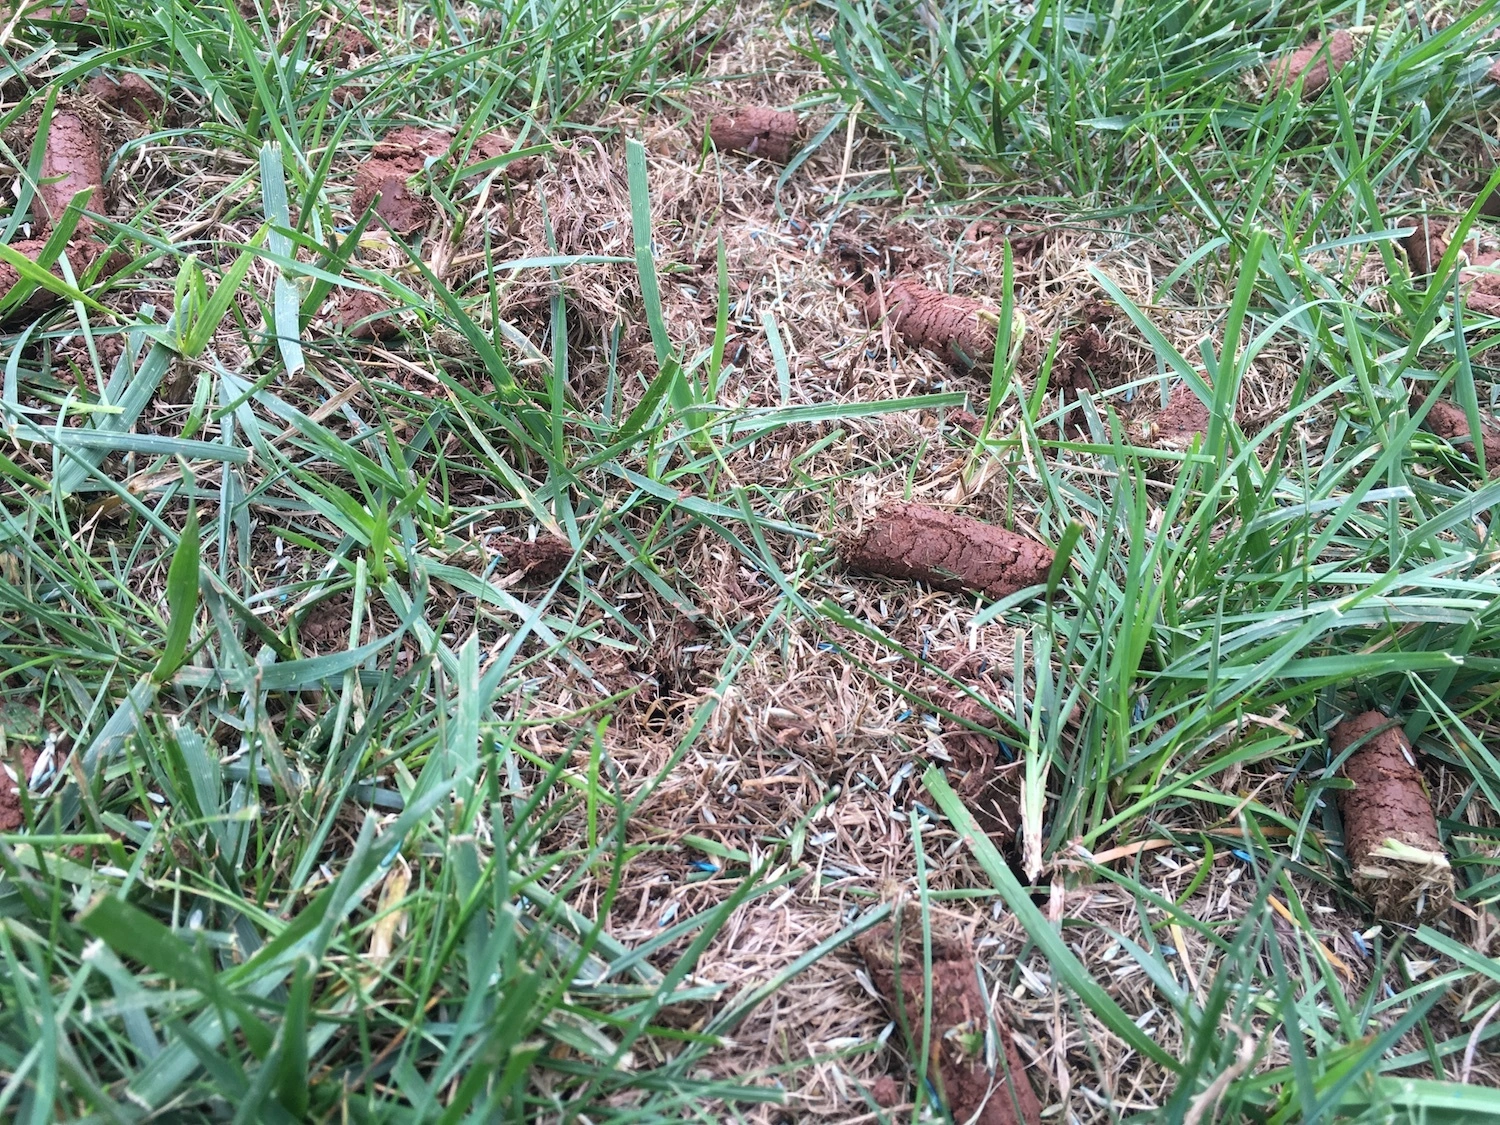 aeration plugs in grass with lawn seed